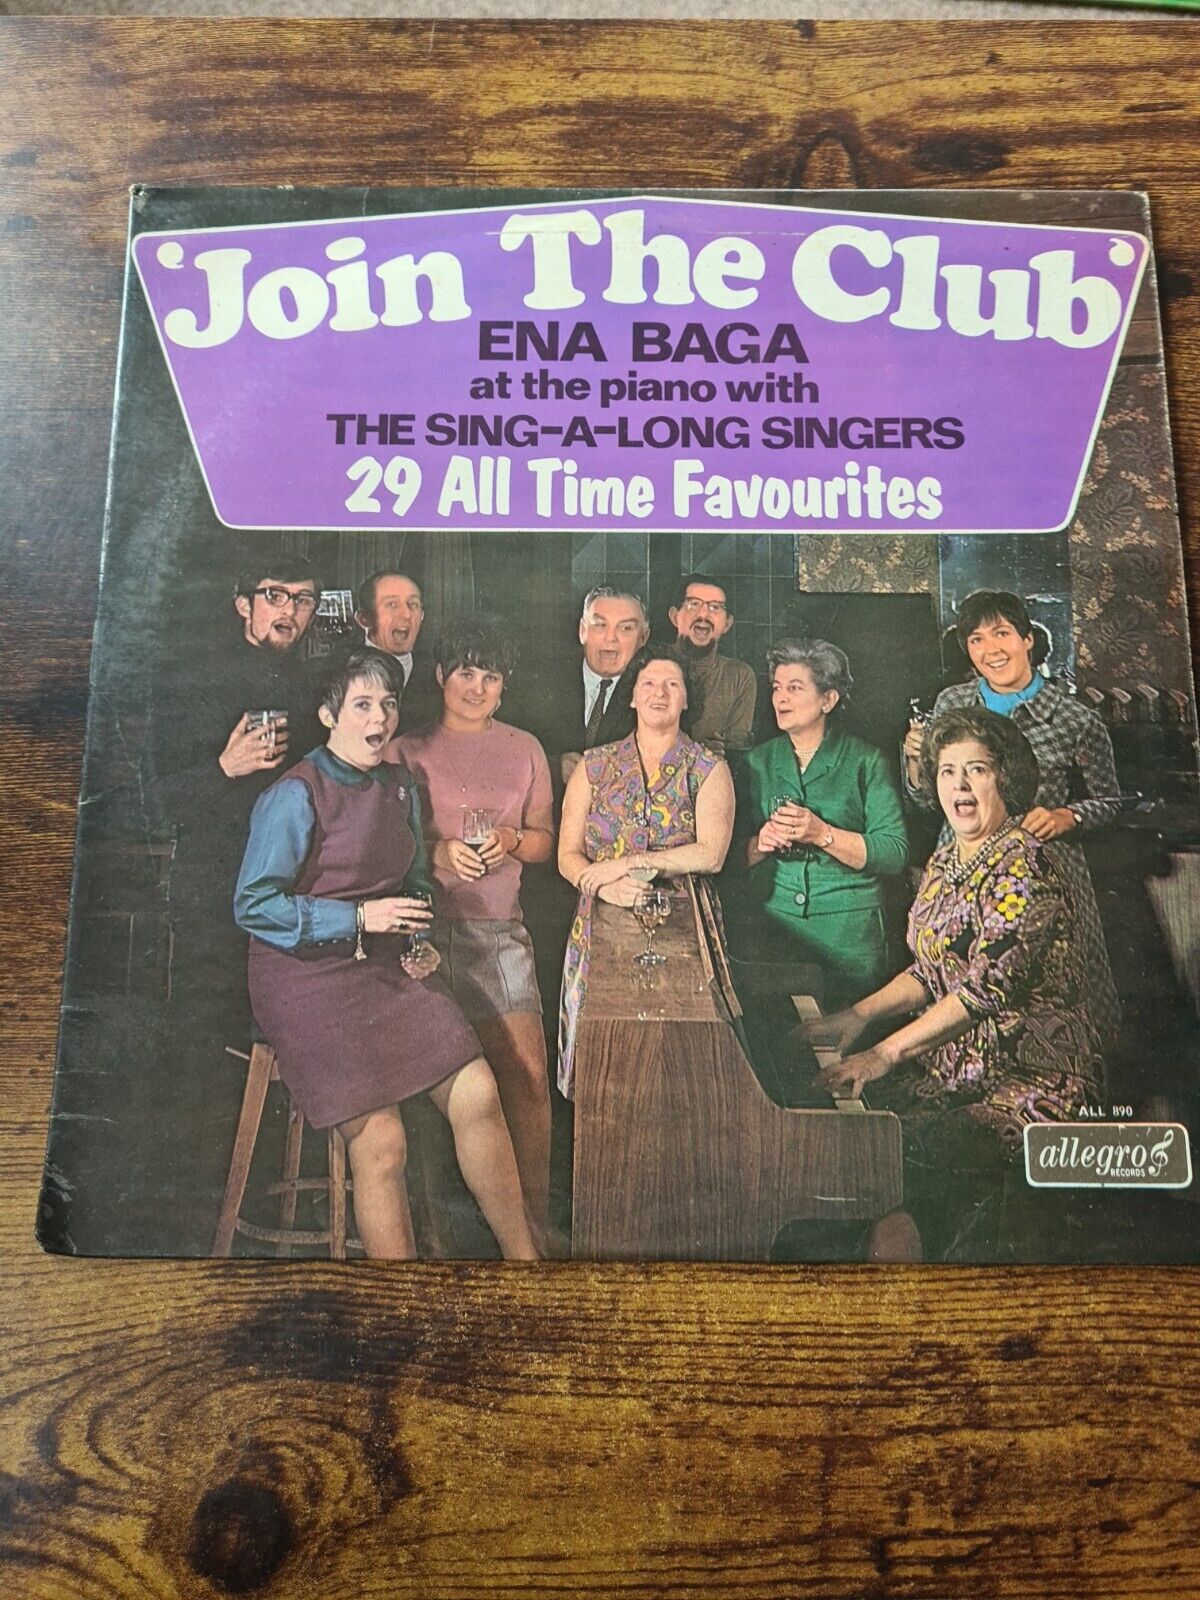 Ena Baga & The Piano with the Singalong Singers - Join The Club - ALL890 - UK